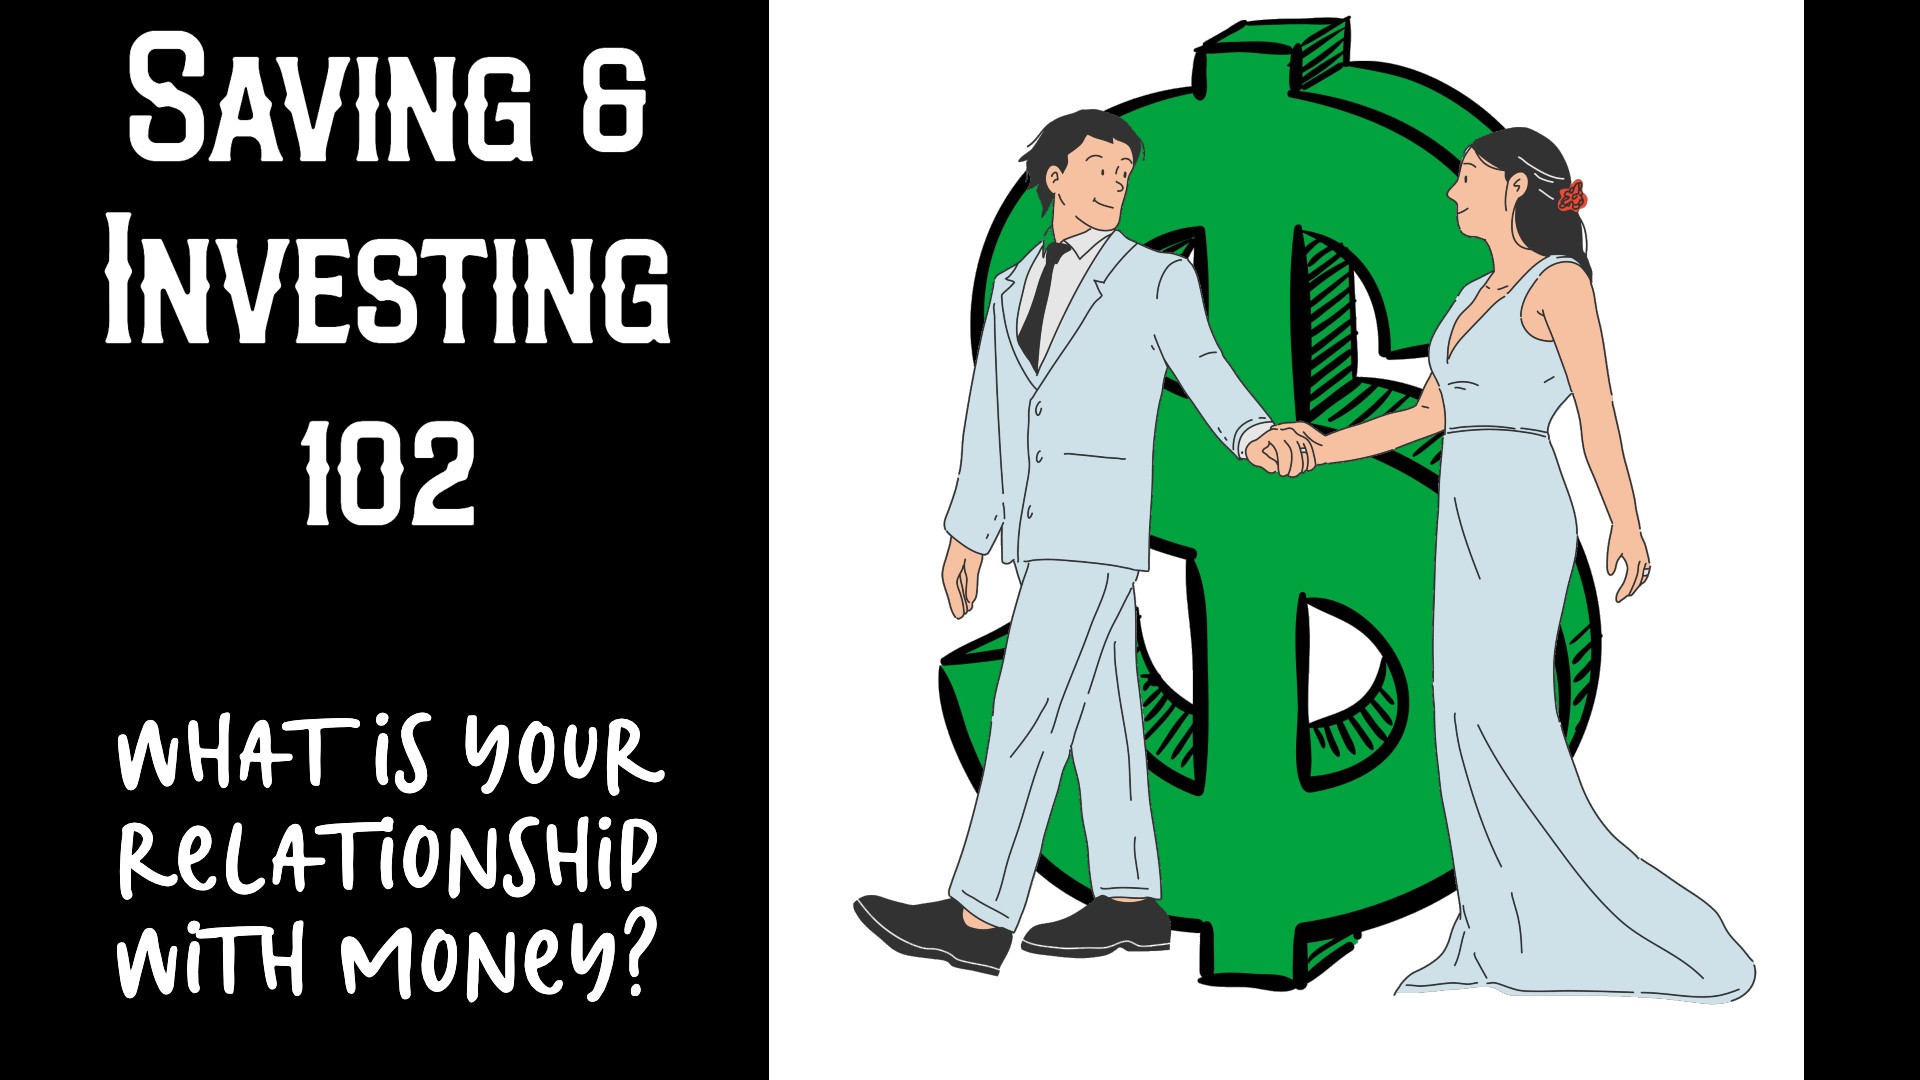 Saving & Investing 102 What is Your Relationship with Money?